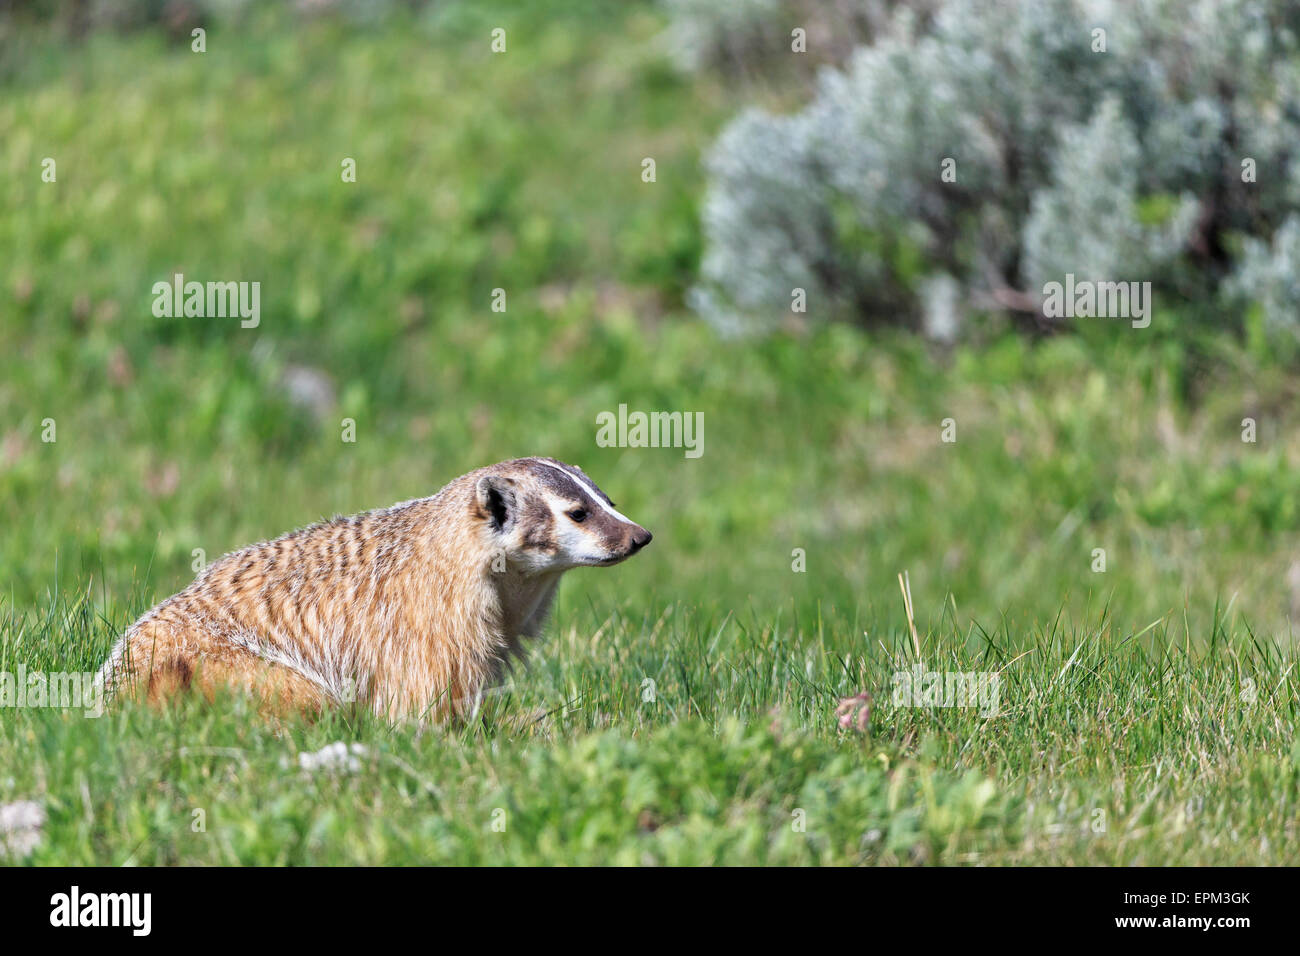 USA, Wyoming, Yellowstone Nationalpark, American badger sitting on a meadow Stock Photo